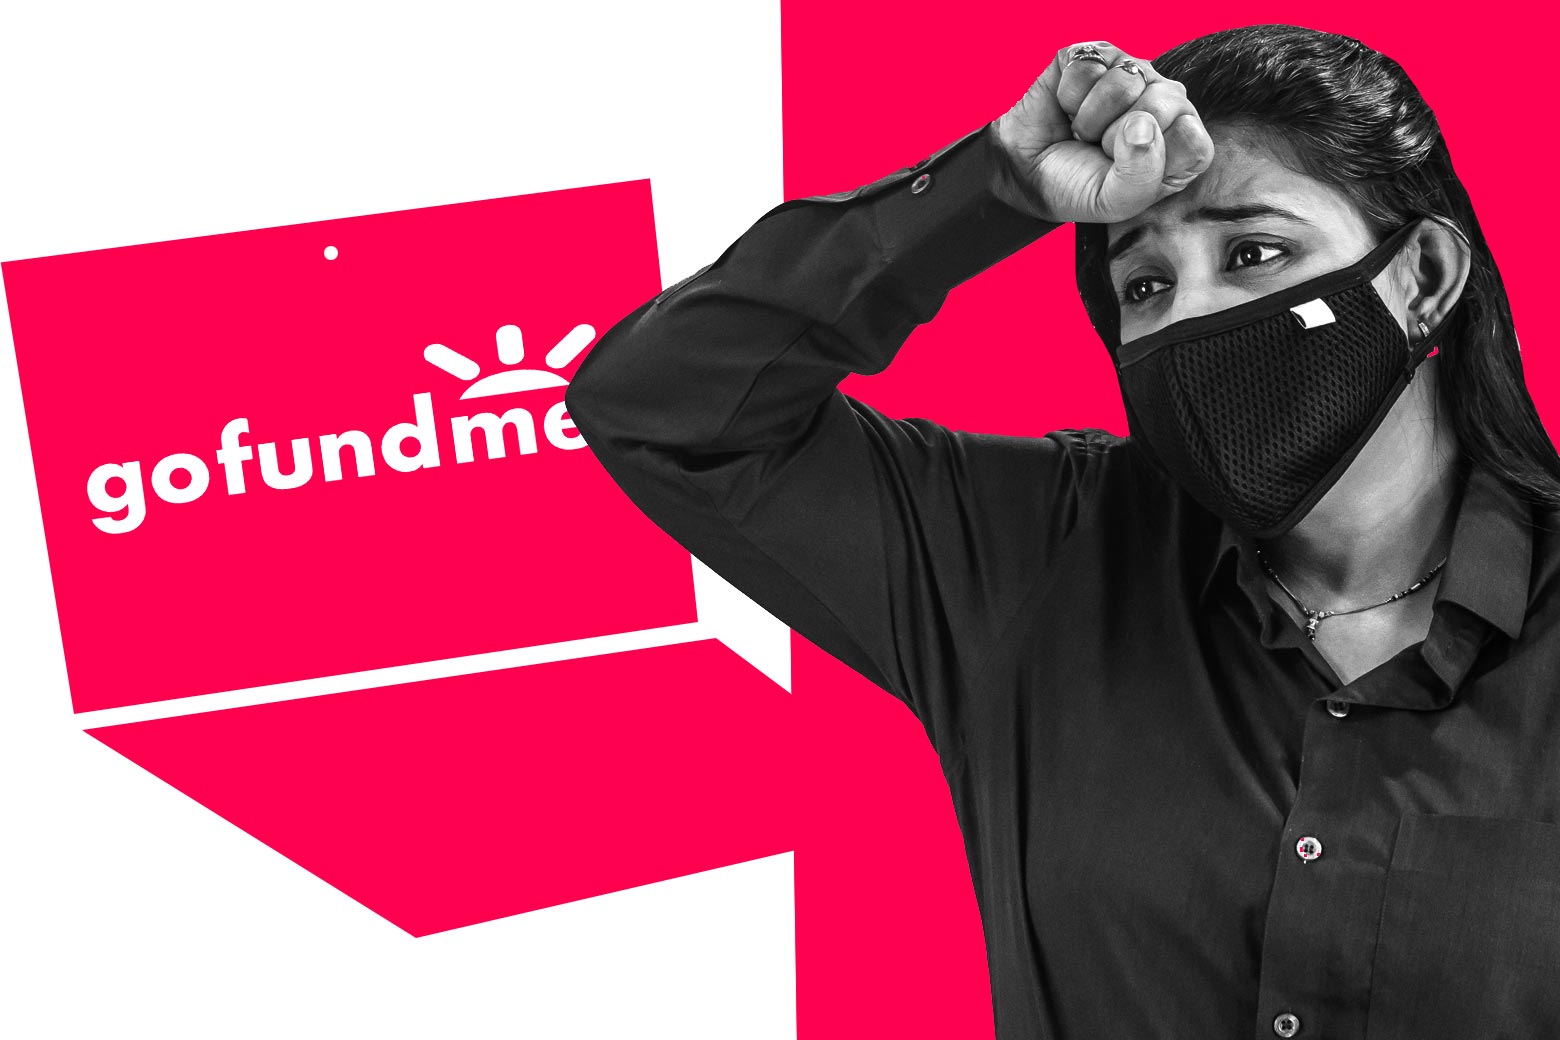 A GoFundMe logo on a laptop and a woman wearing a mask looking distressed